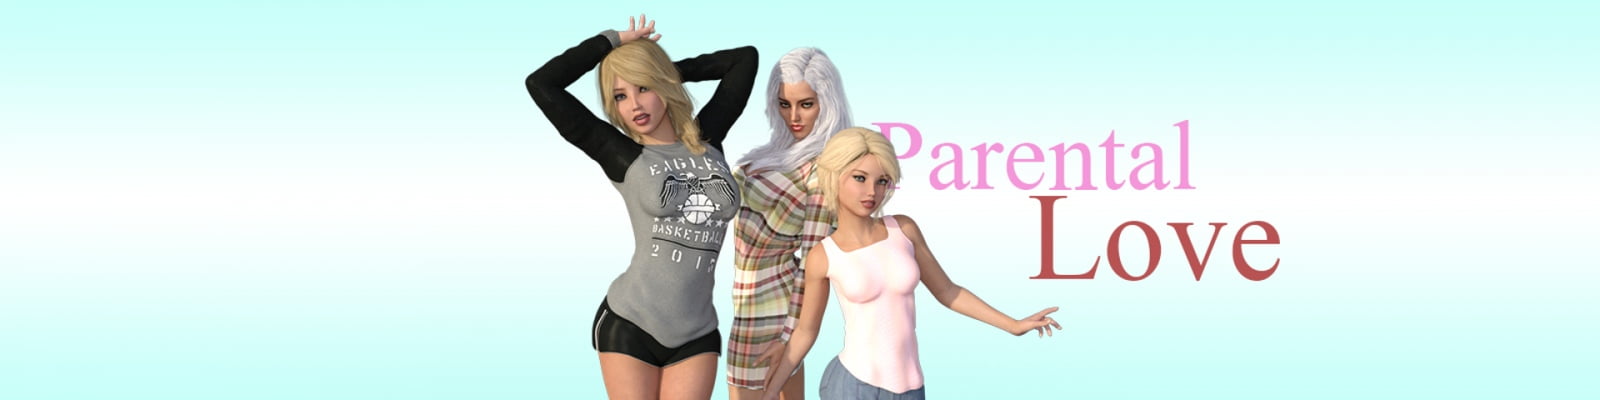 Parental Love [Luxee] Game Free Download